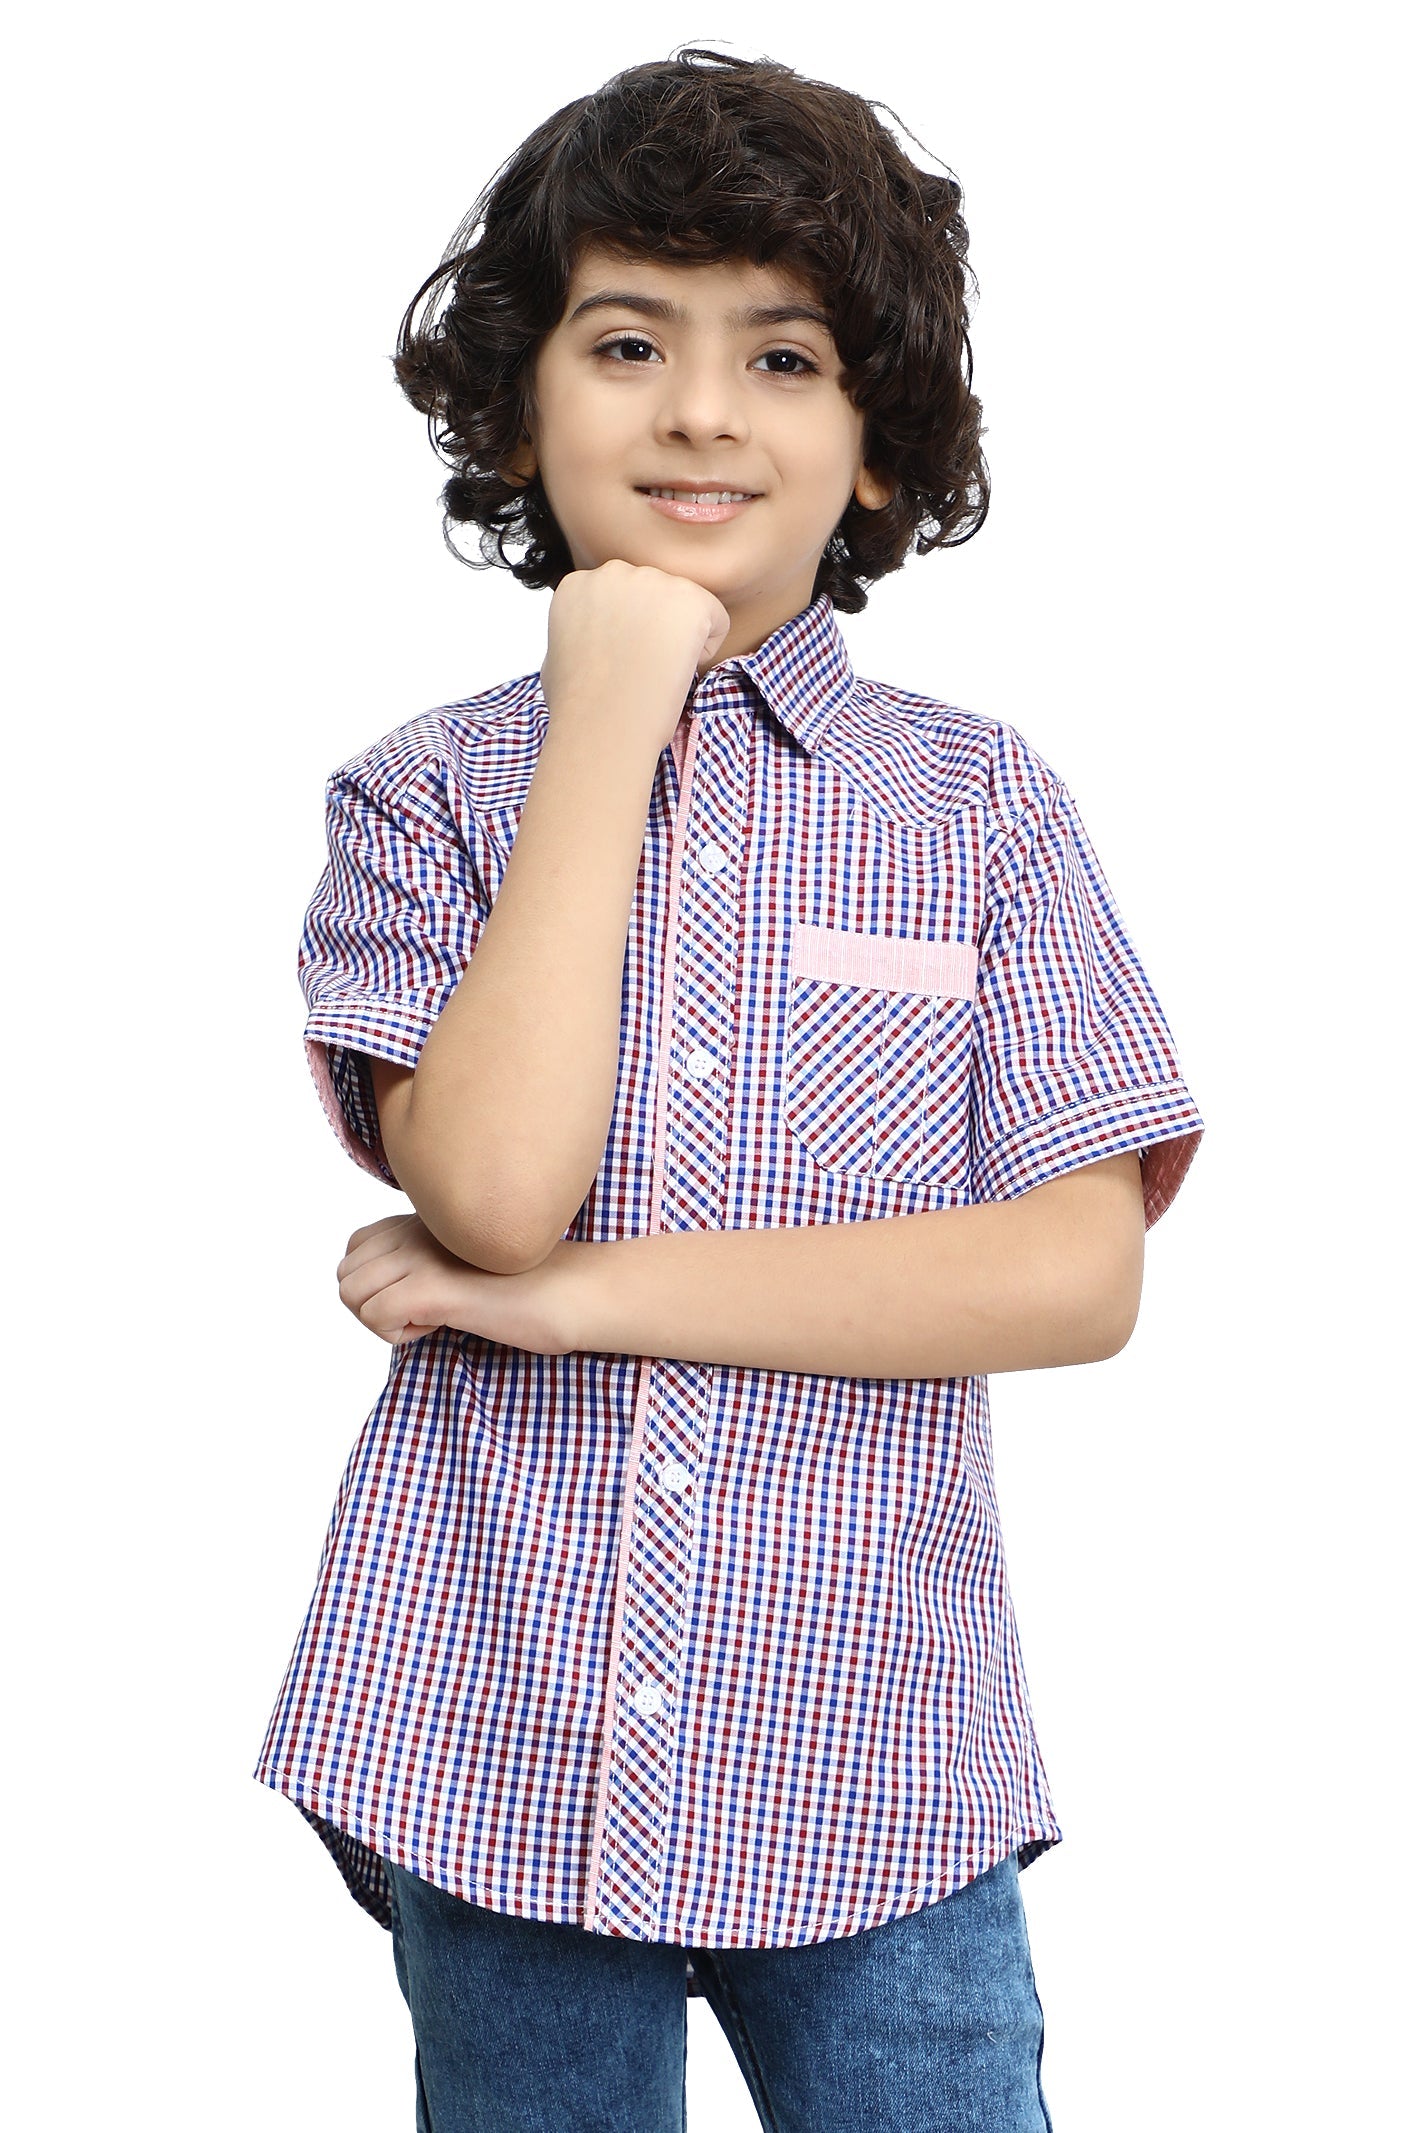 Boys Casual Shirt - Diners